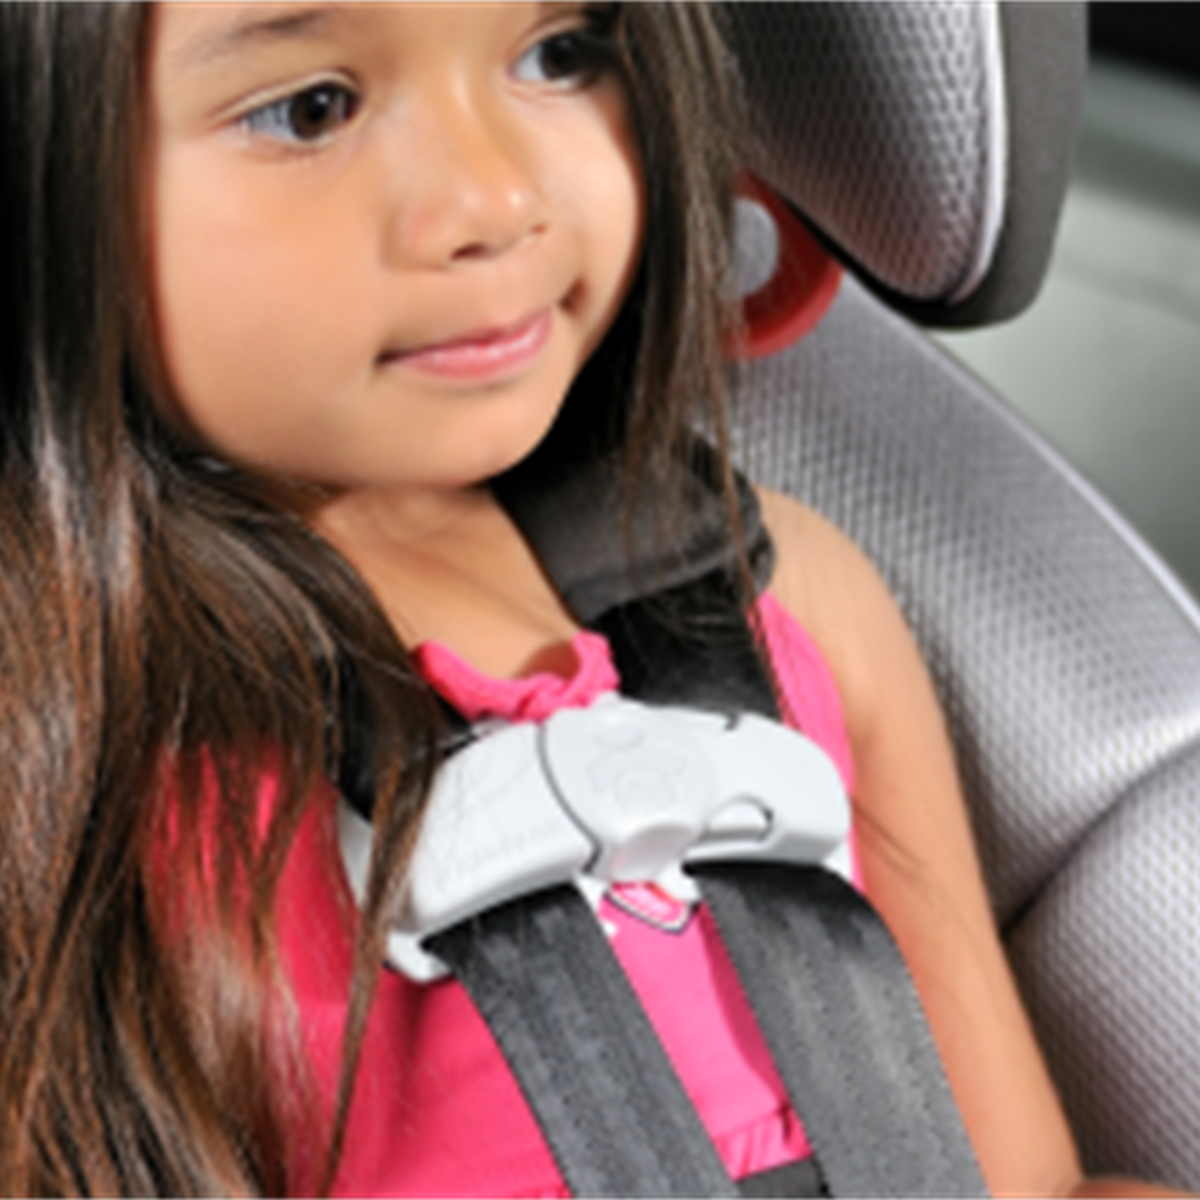 Car Seats Information For Families, Does A 4 Year Old Need To Be In Car Seat